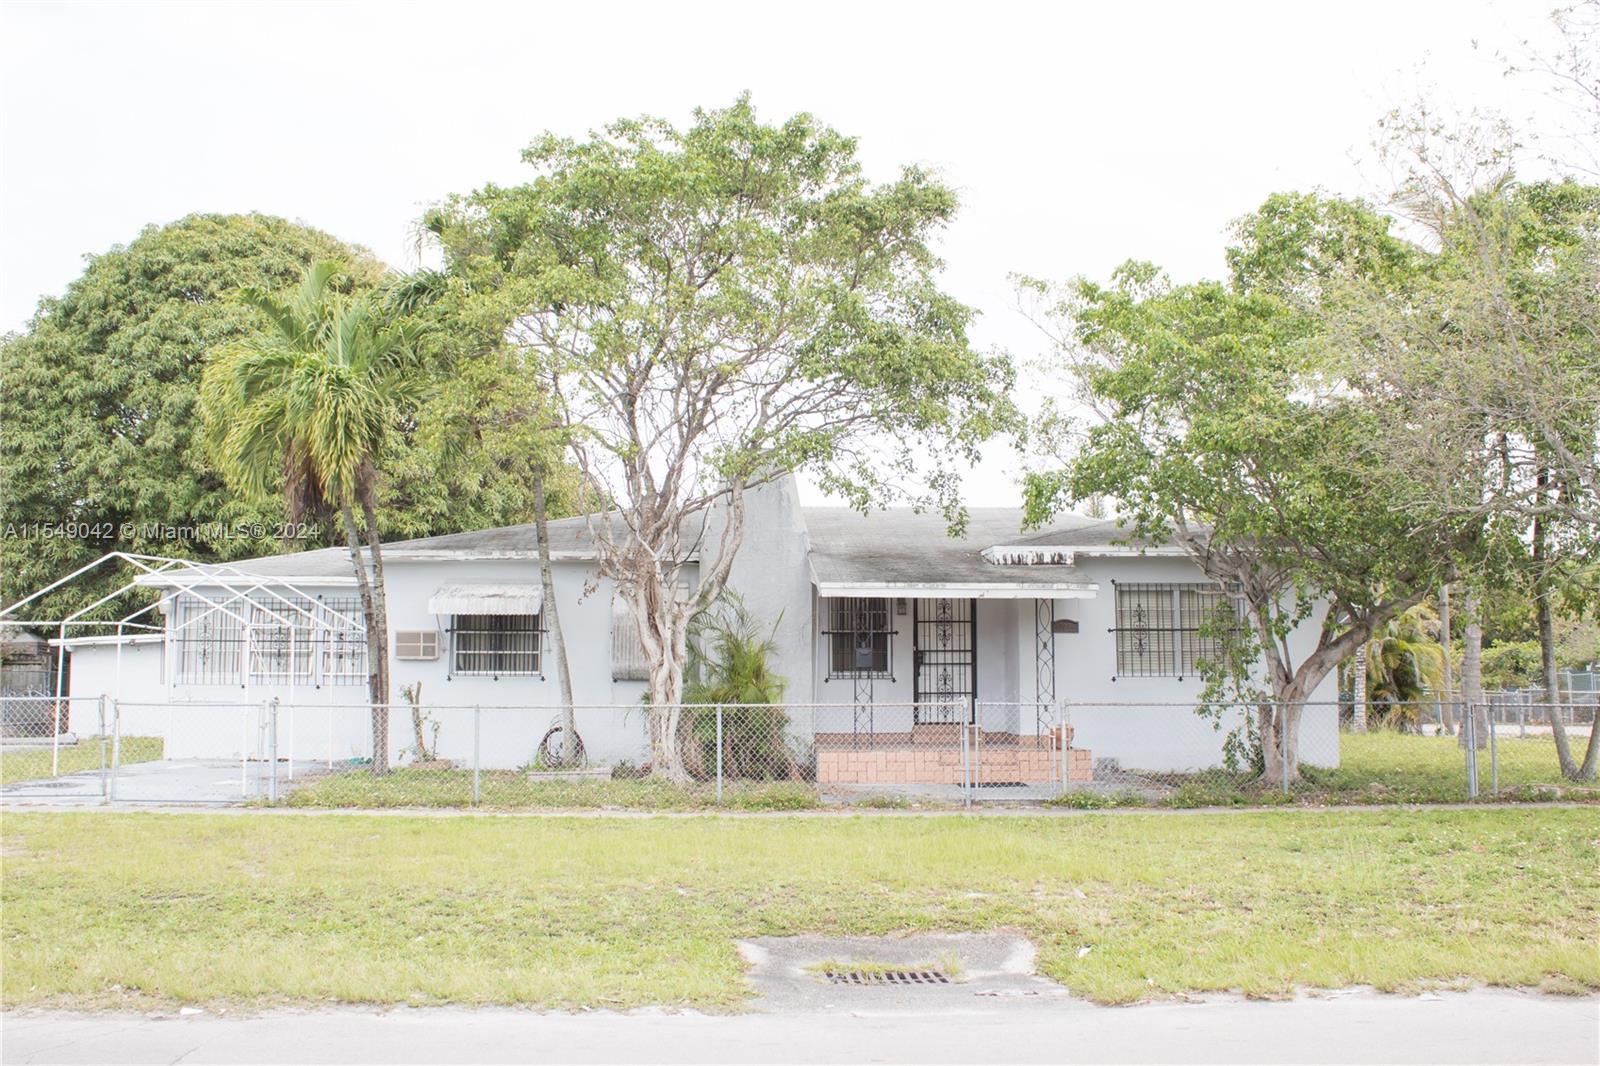 Photo of 901 NW 34th St in Miami, FL